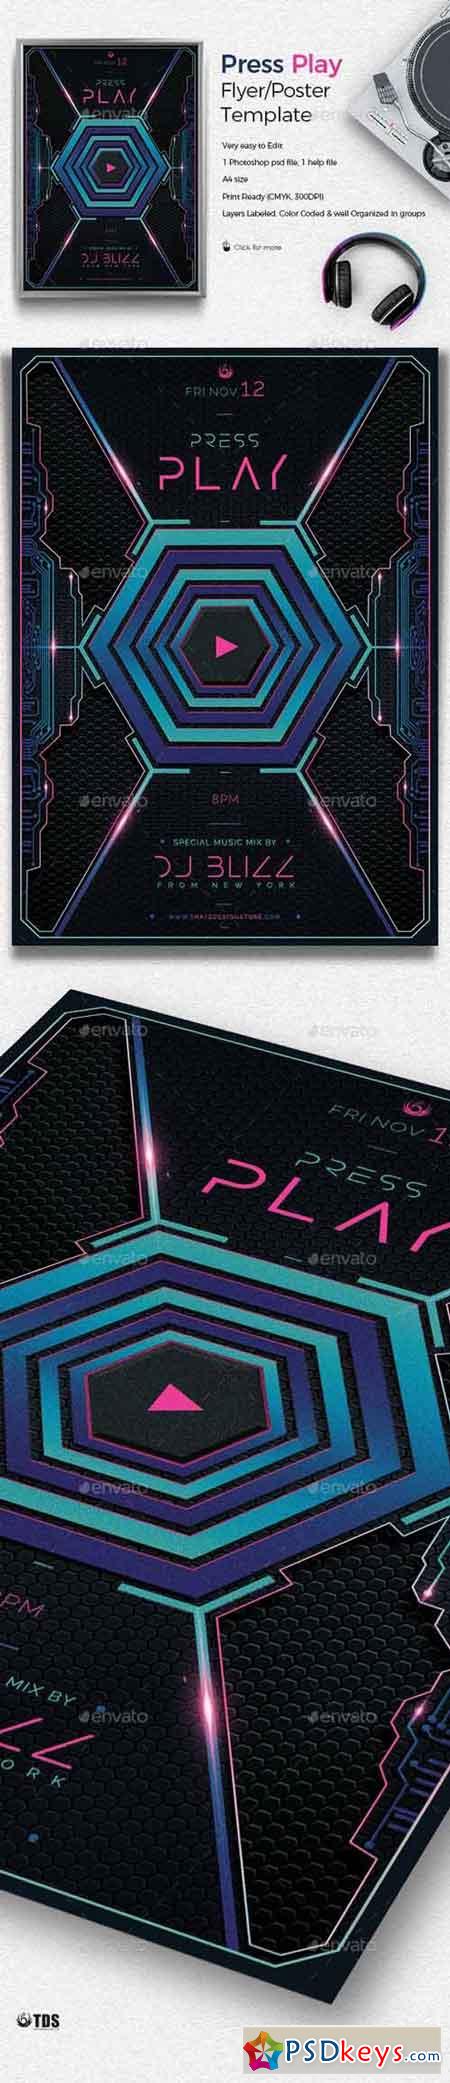 Press Play Flyer Template 19488077